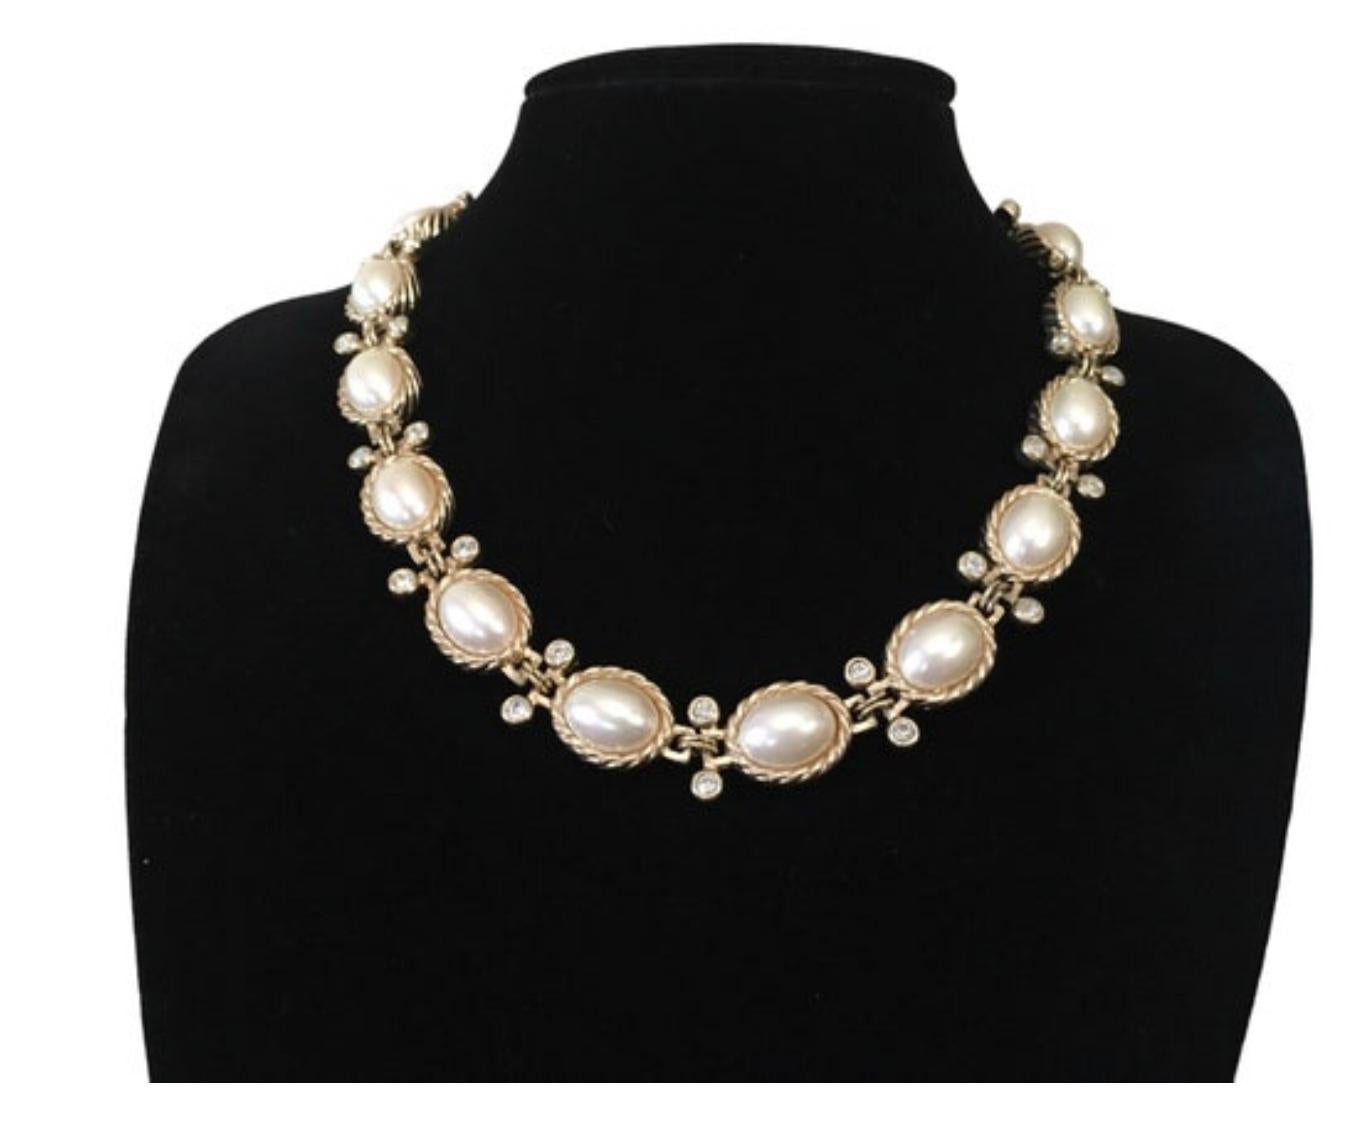 Vintage Christian Dior faux pearl statement necklace.
Articulated links
16 oval faux pearl links with crystal spacers in between each link.
Each link is approx 1.7 cm x 1.4 cm 
Adjustable length max 48 cm minimum 43 cm 
In excellent condition